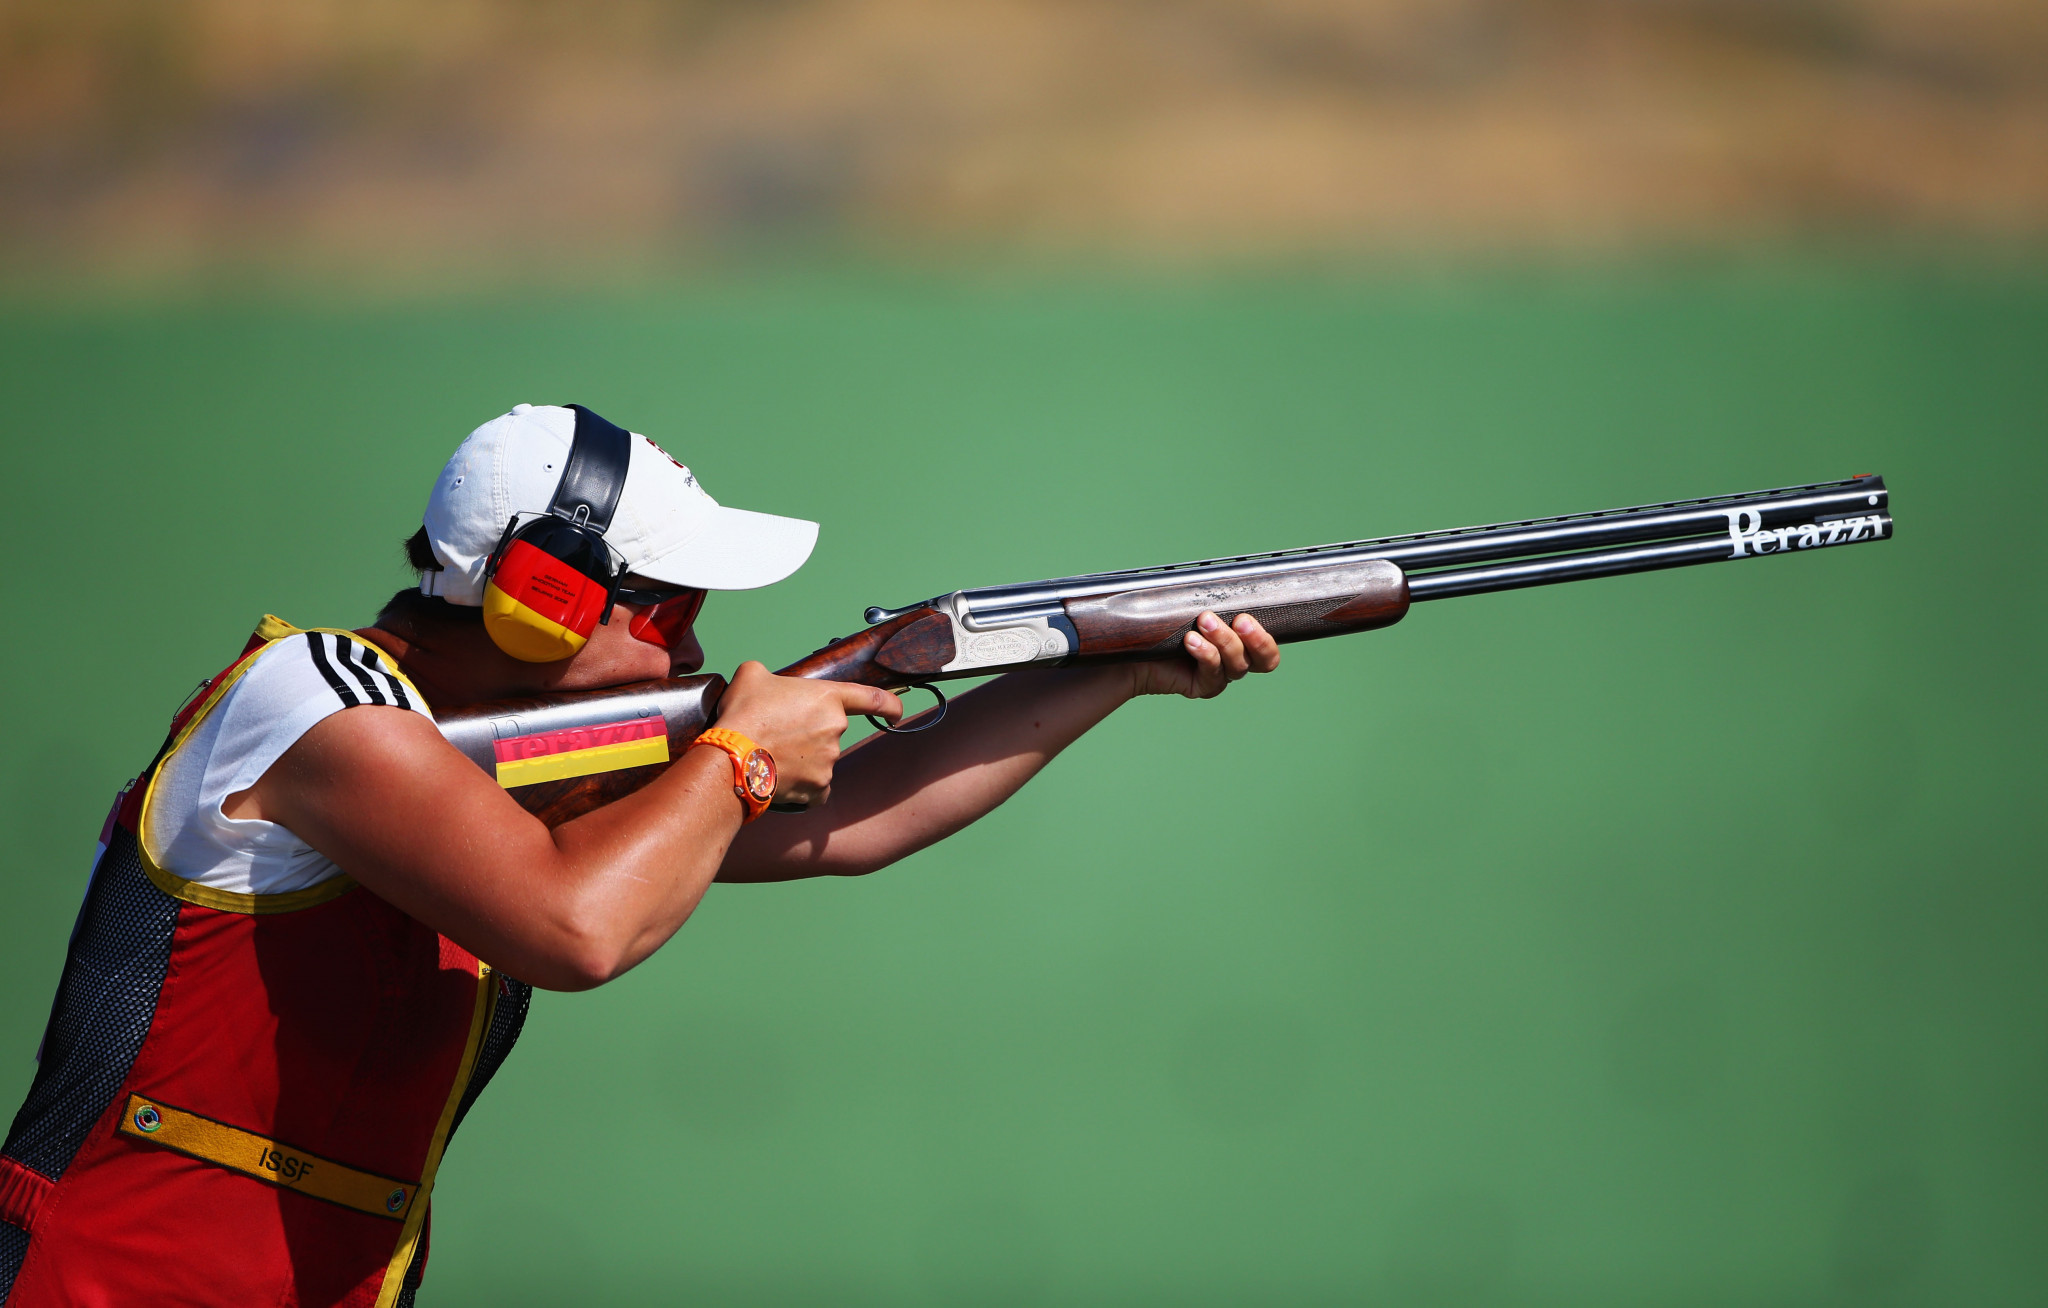 Beijing 2008 bronze medallist Christine Wenzel helped Germany to win the women's team skeet gold at the ISSF World Cup in Baku ©Getty Images